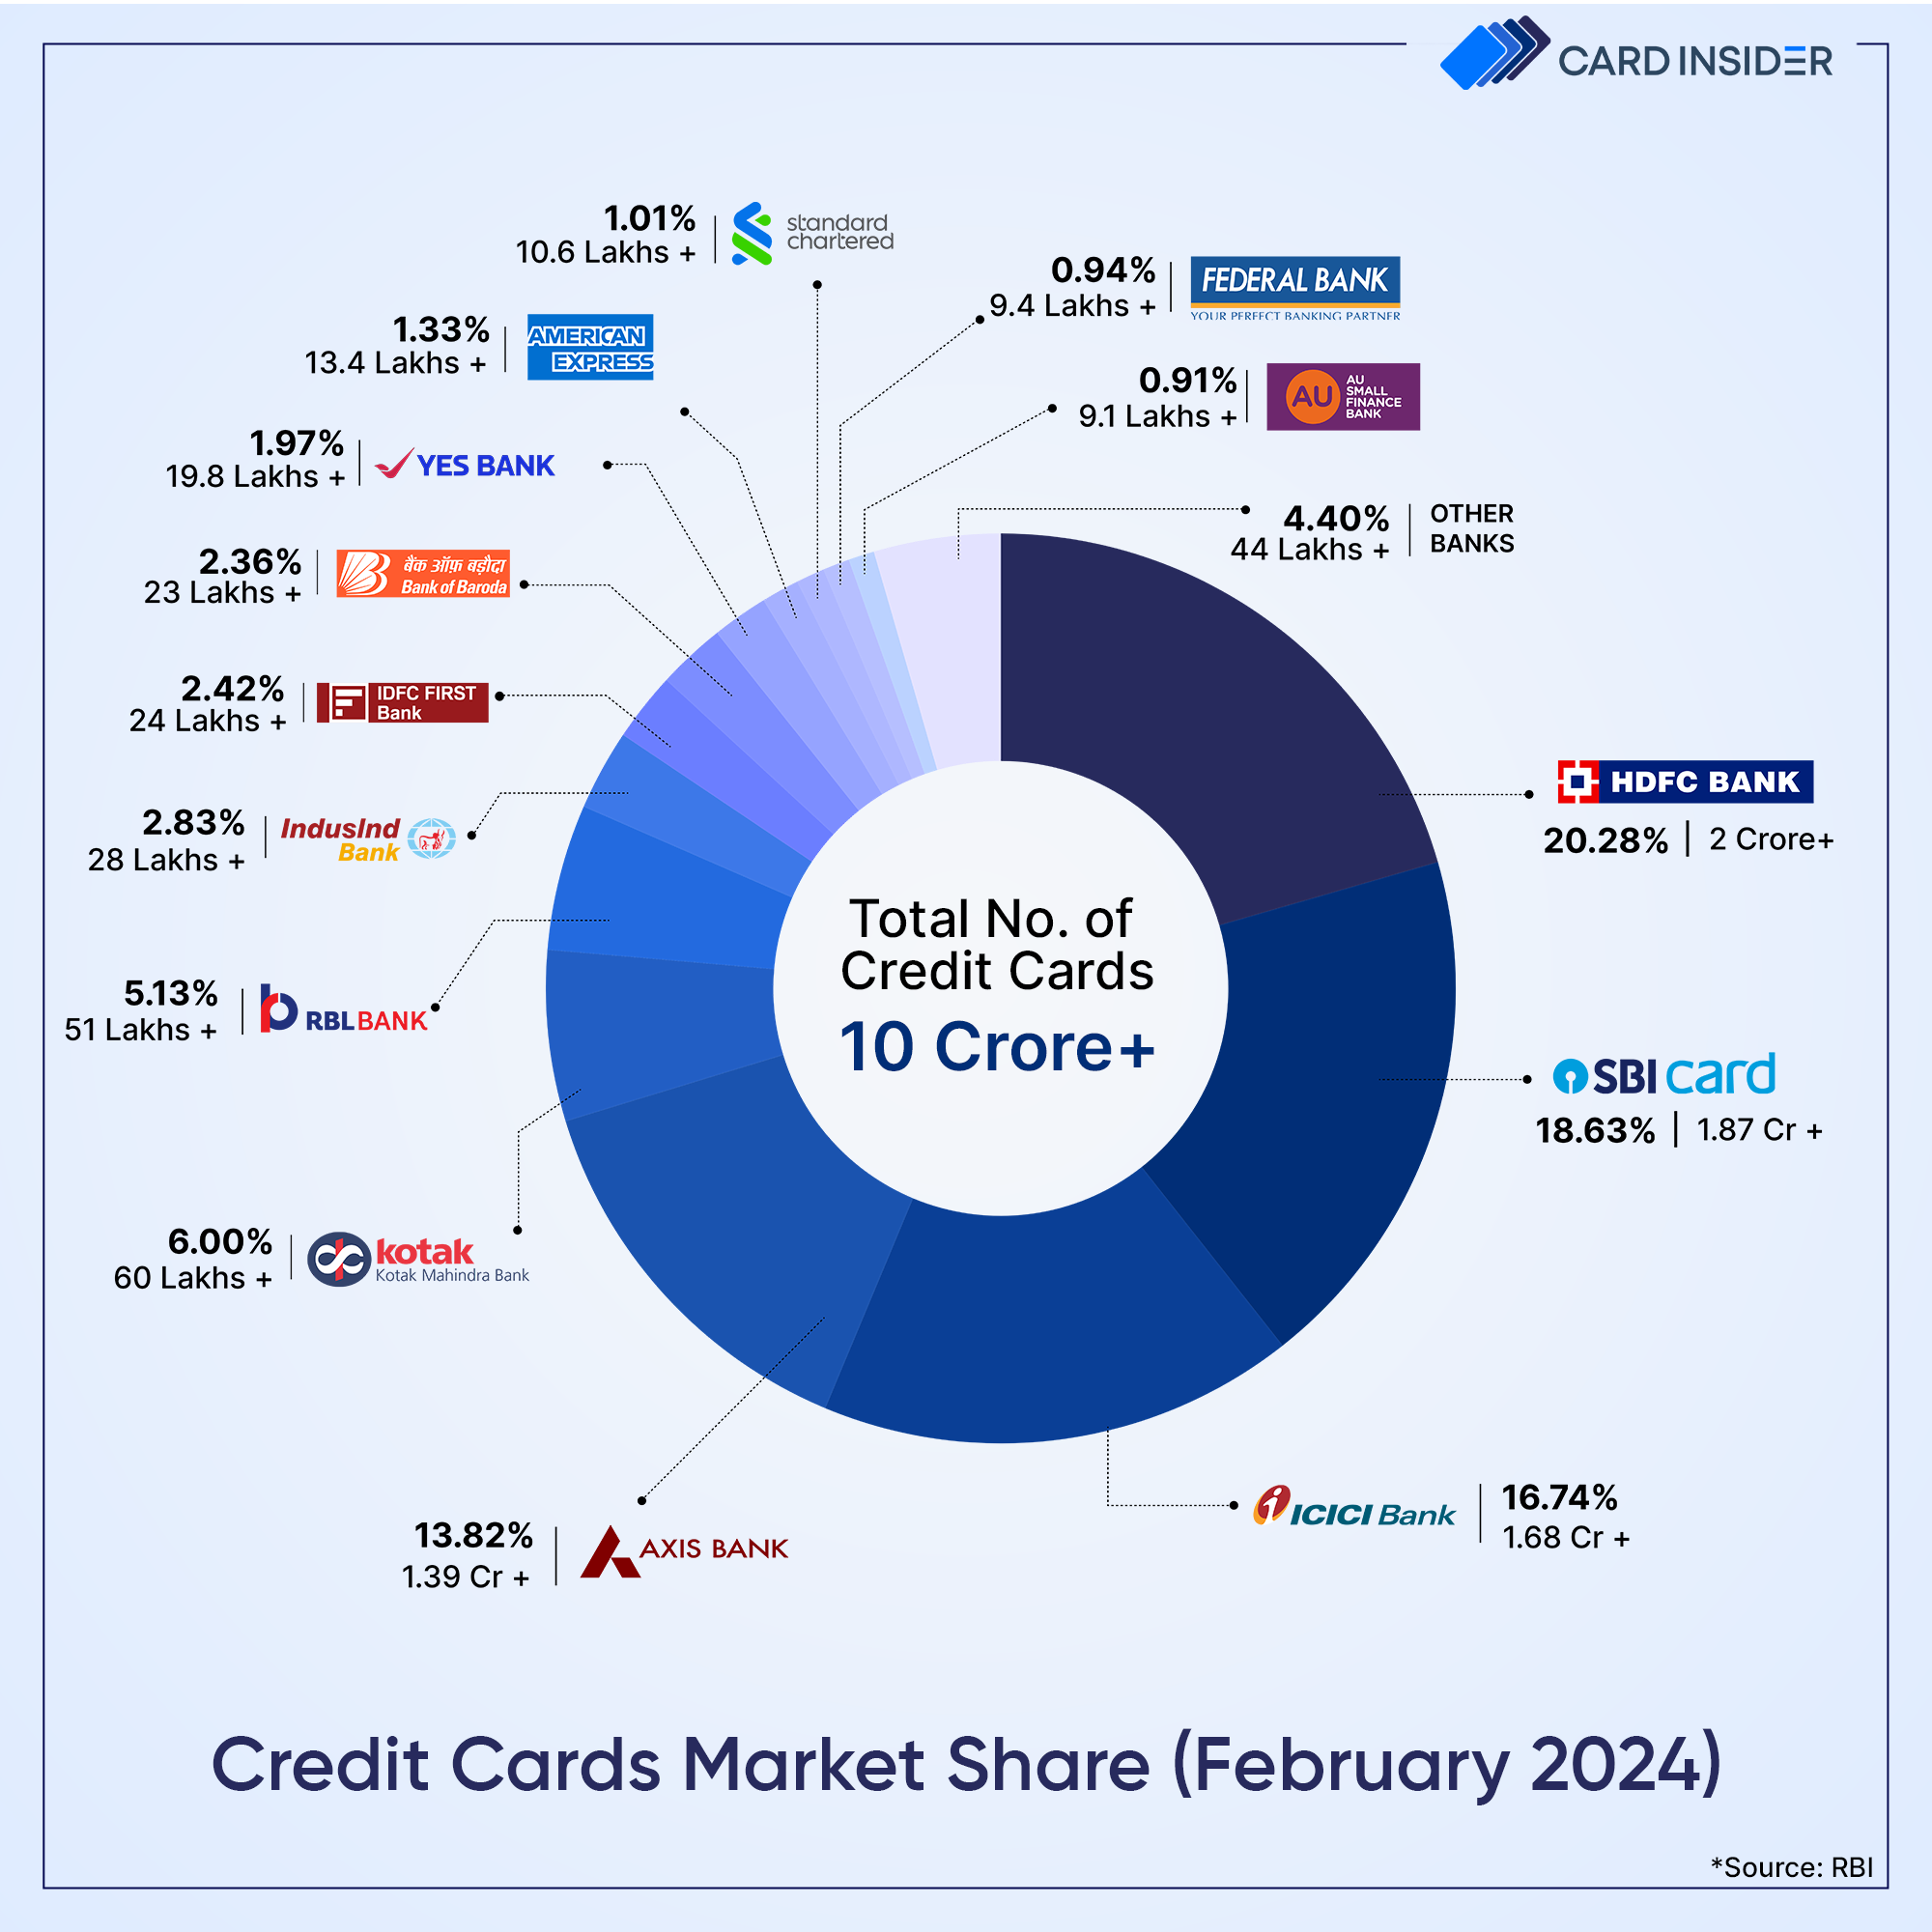 Credit card market share across Indian banks